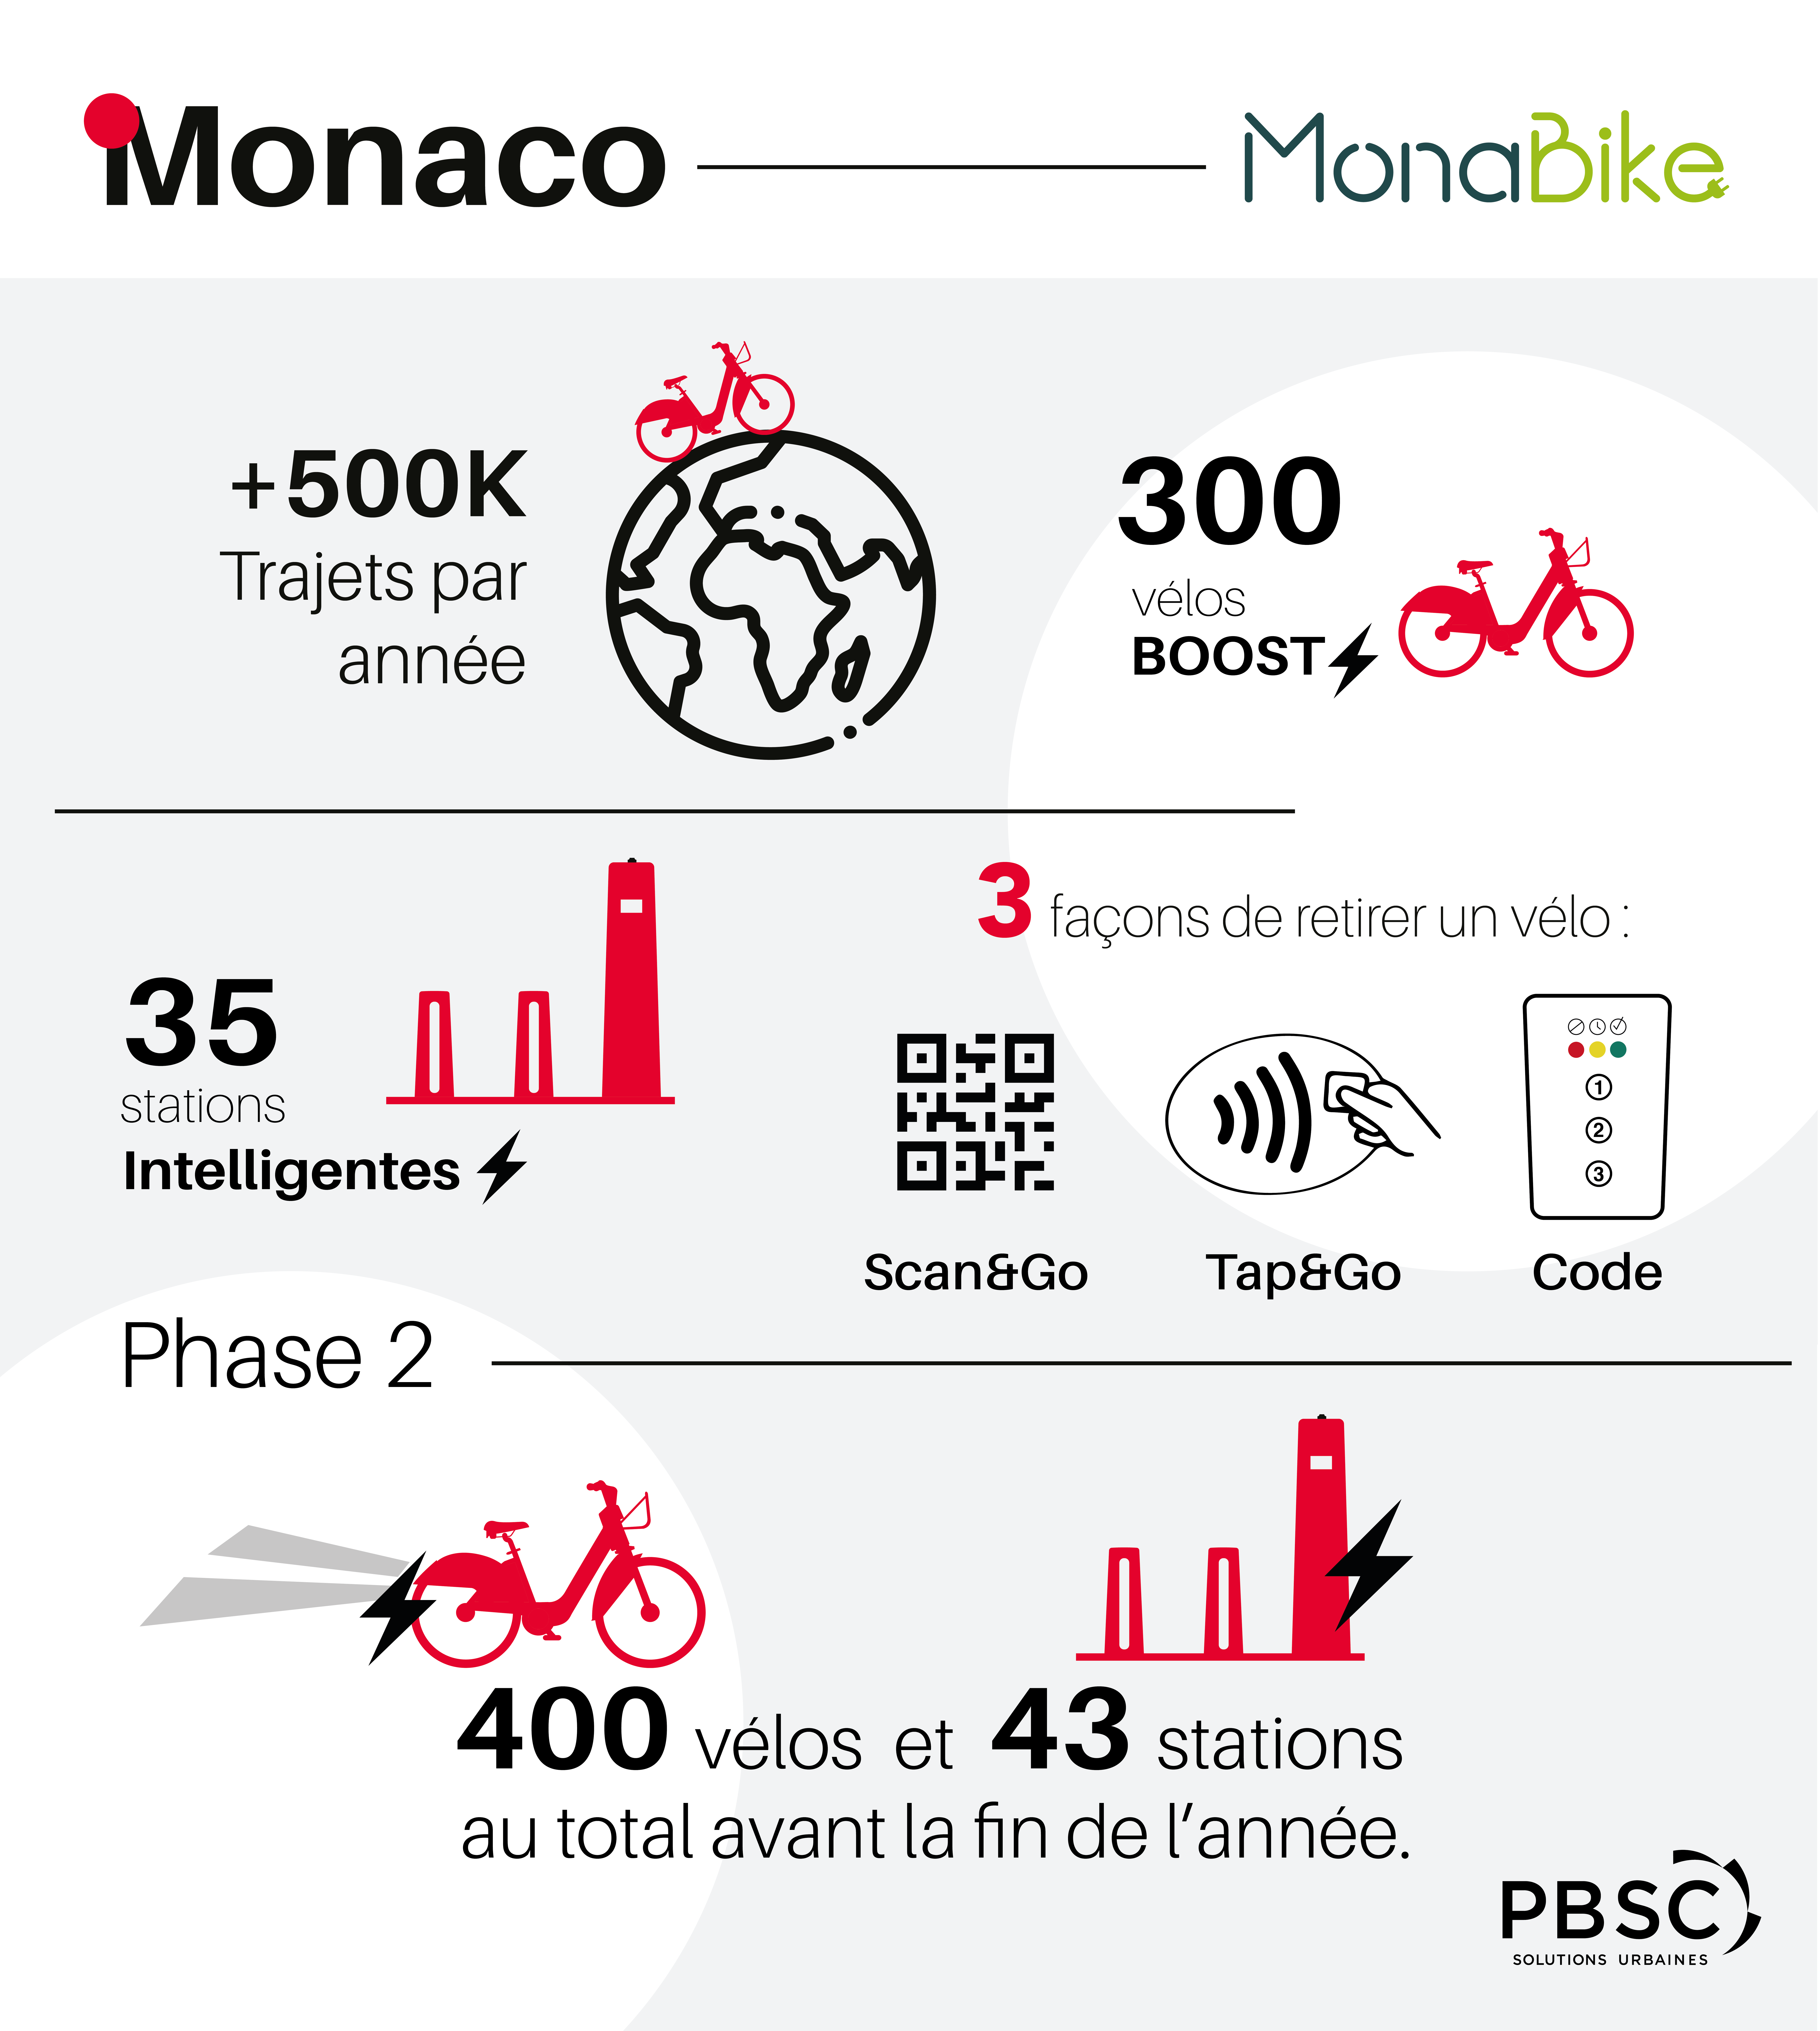 infographic-monaco_FR.png (1.75 MB)